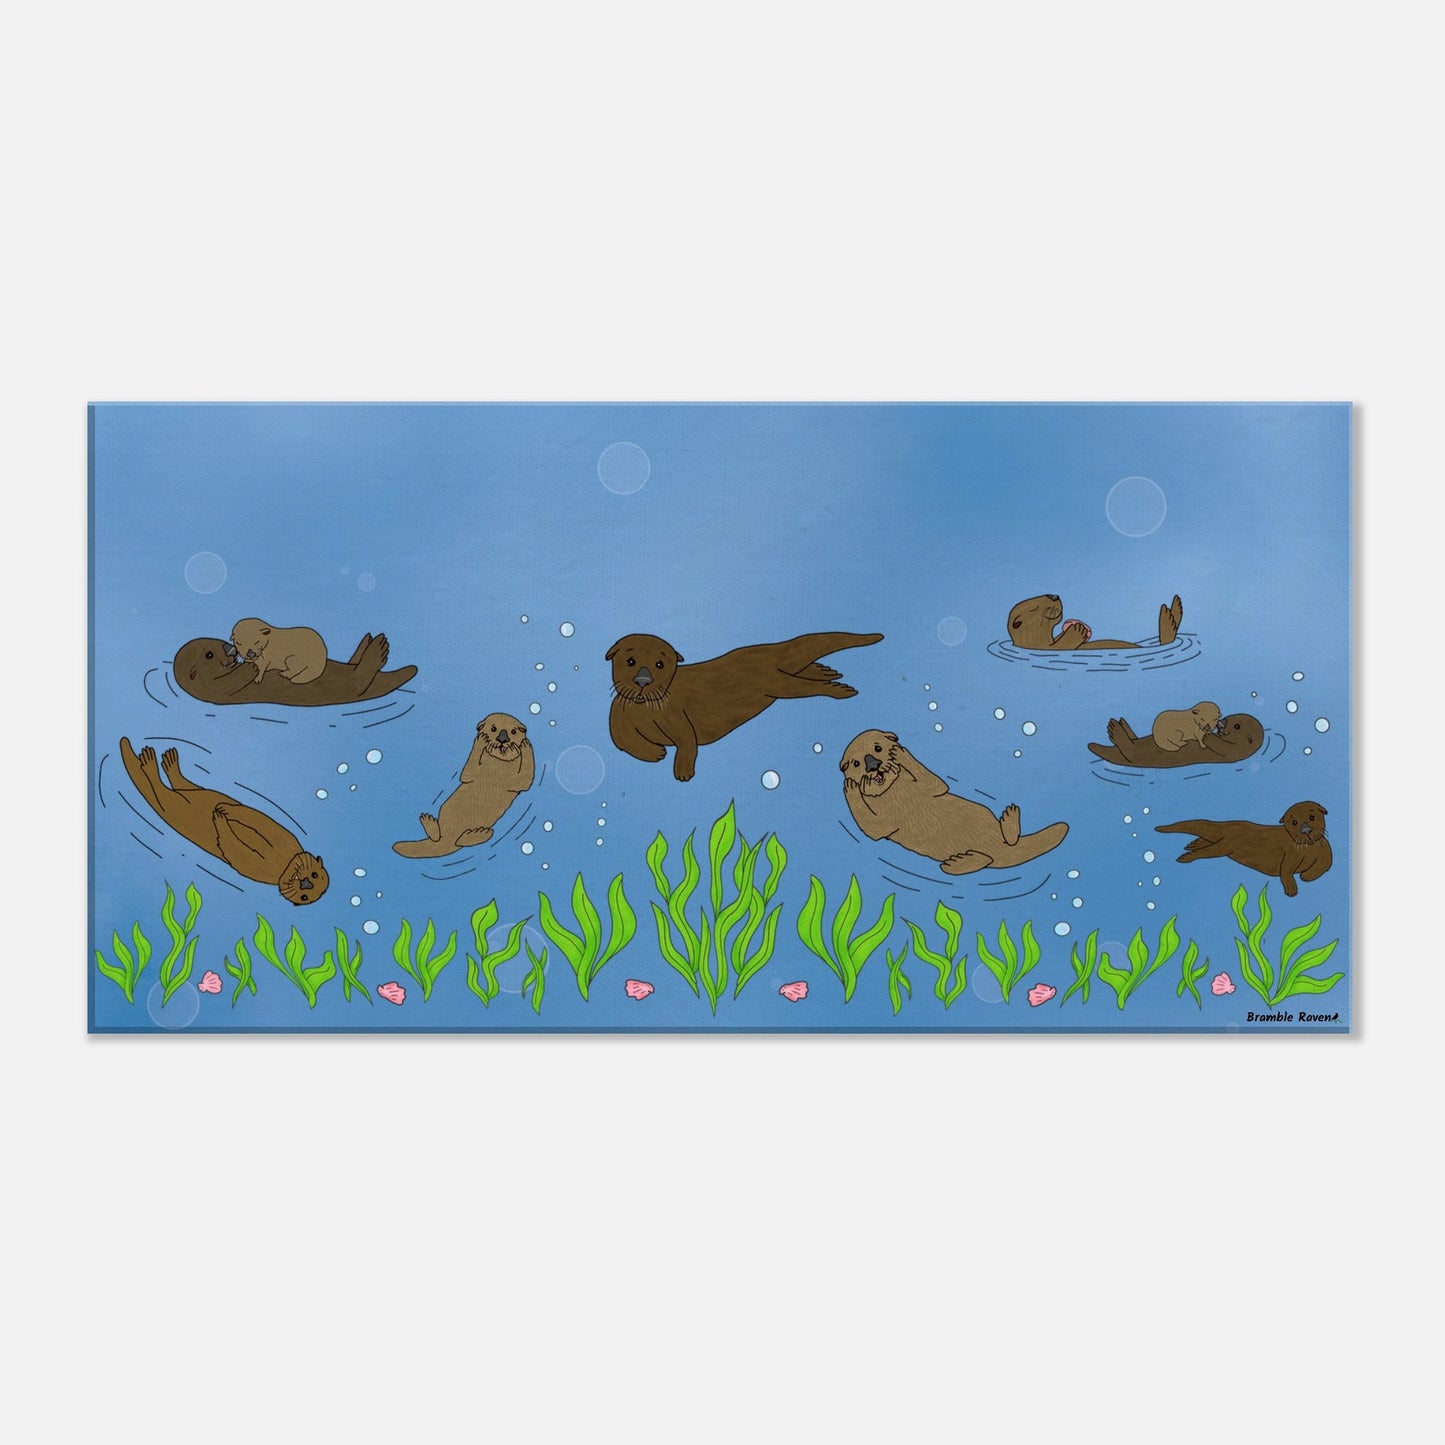 16 by 32 inch slim canvas wall art print of sea otters swimming along the seabed. Hanging hardware included for easy installation.